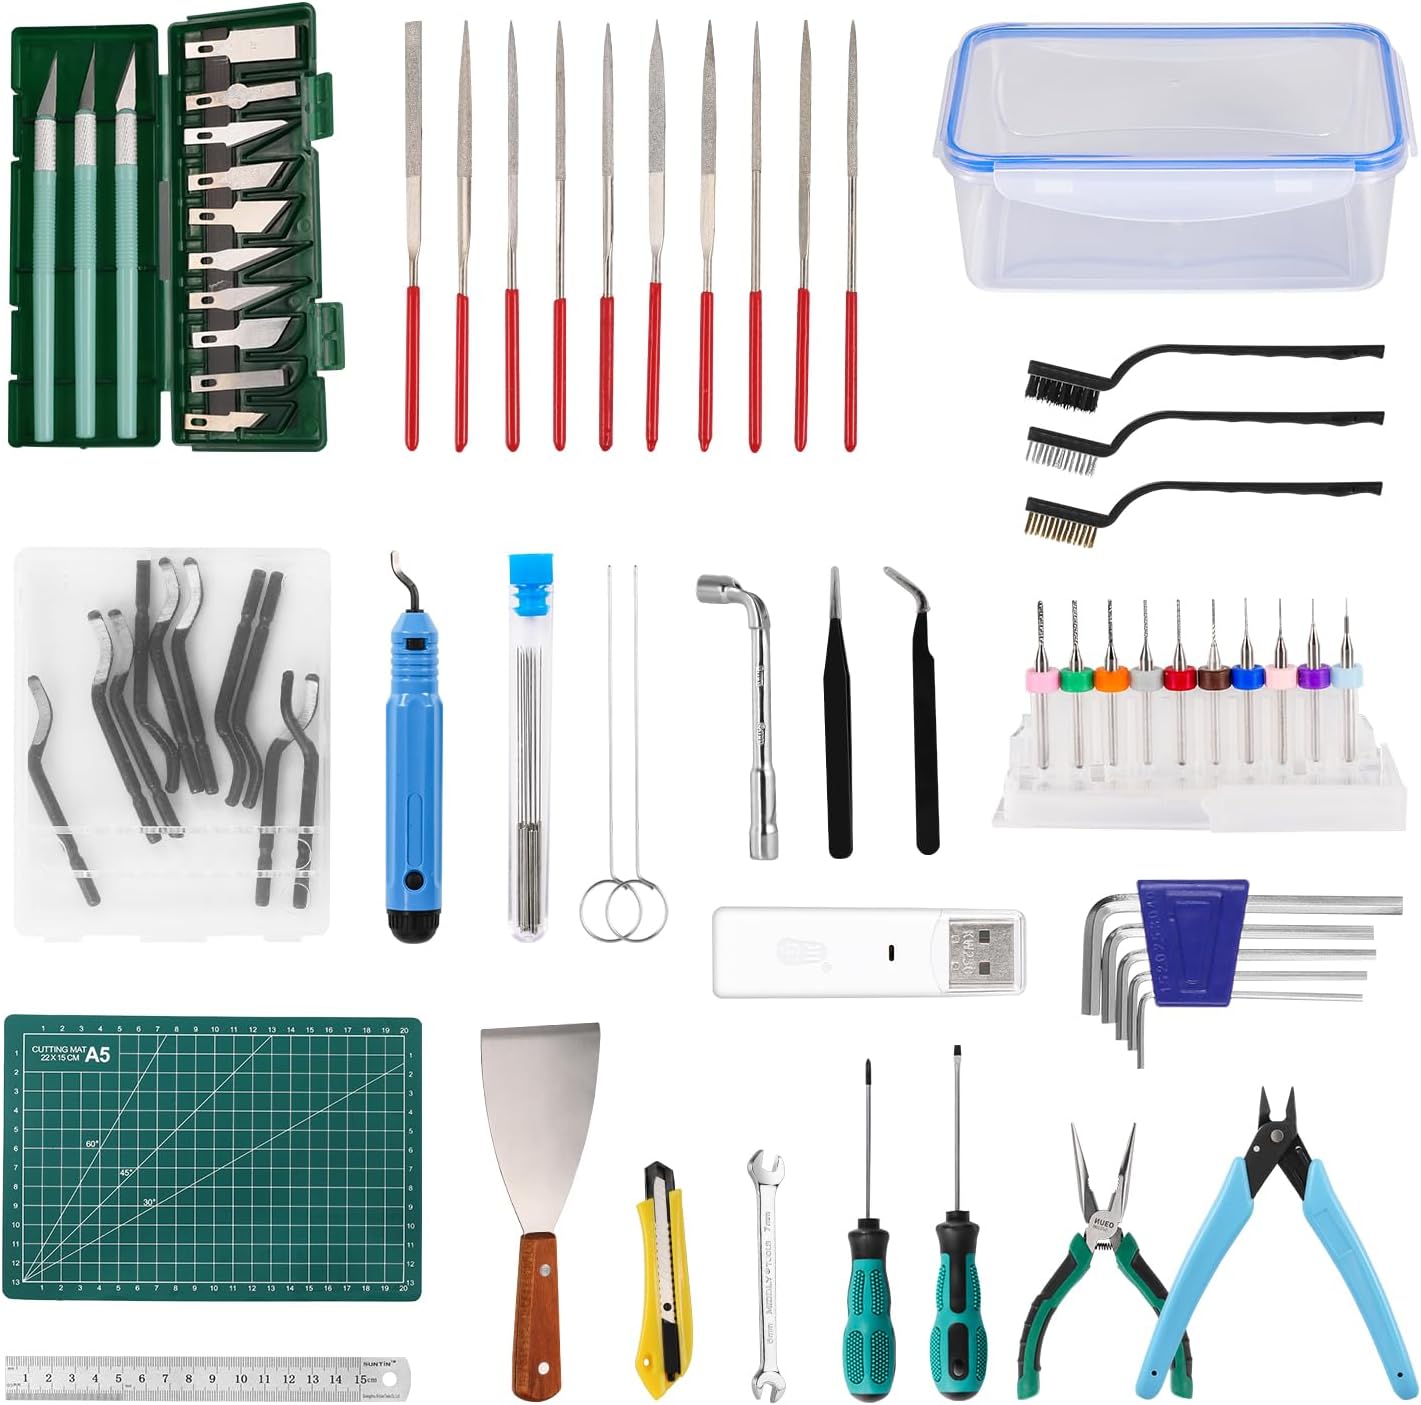 sovol-3d-printer-tools-kit-78-pcs-3d-printer-accessories-with-nozzle-cleaning-kit-removable-multi-function-screwdriver-k Sovol 3D Printer Tools Kit Review